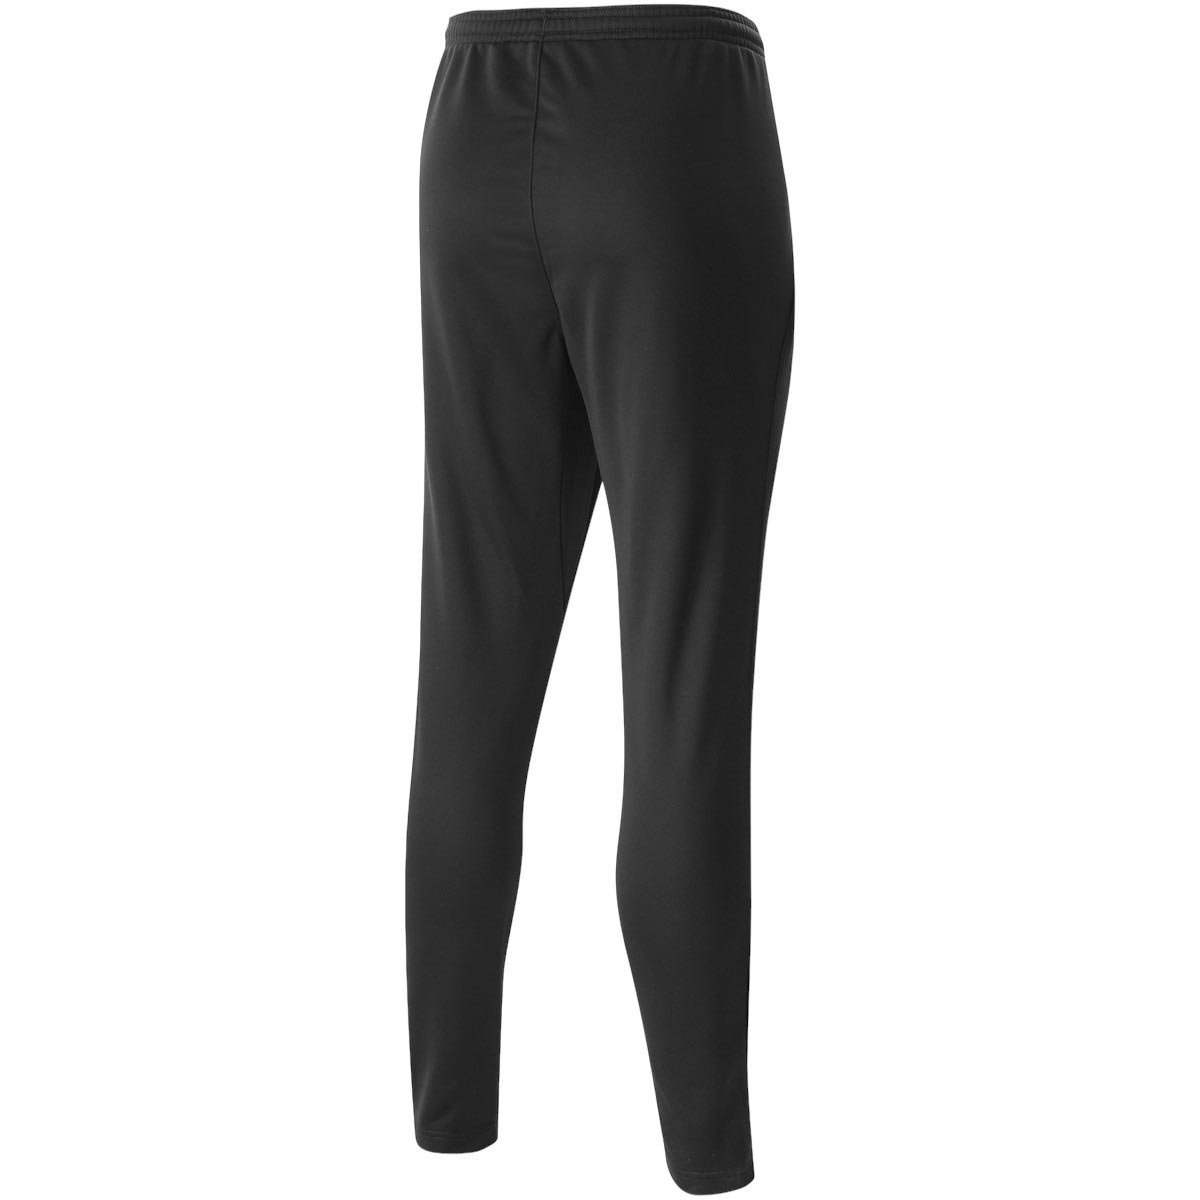 UMBRO TAPERED KNIT TRAINING PANTS